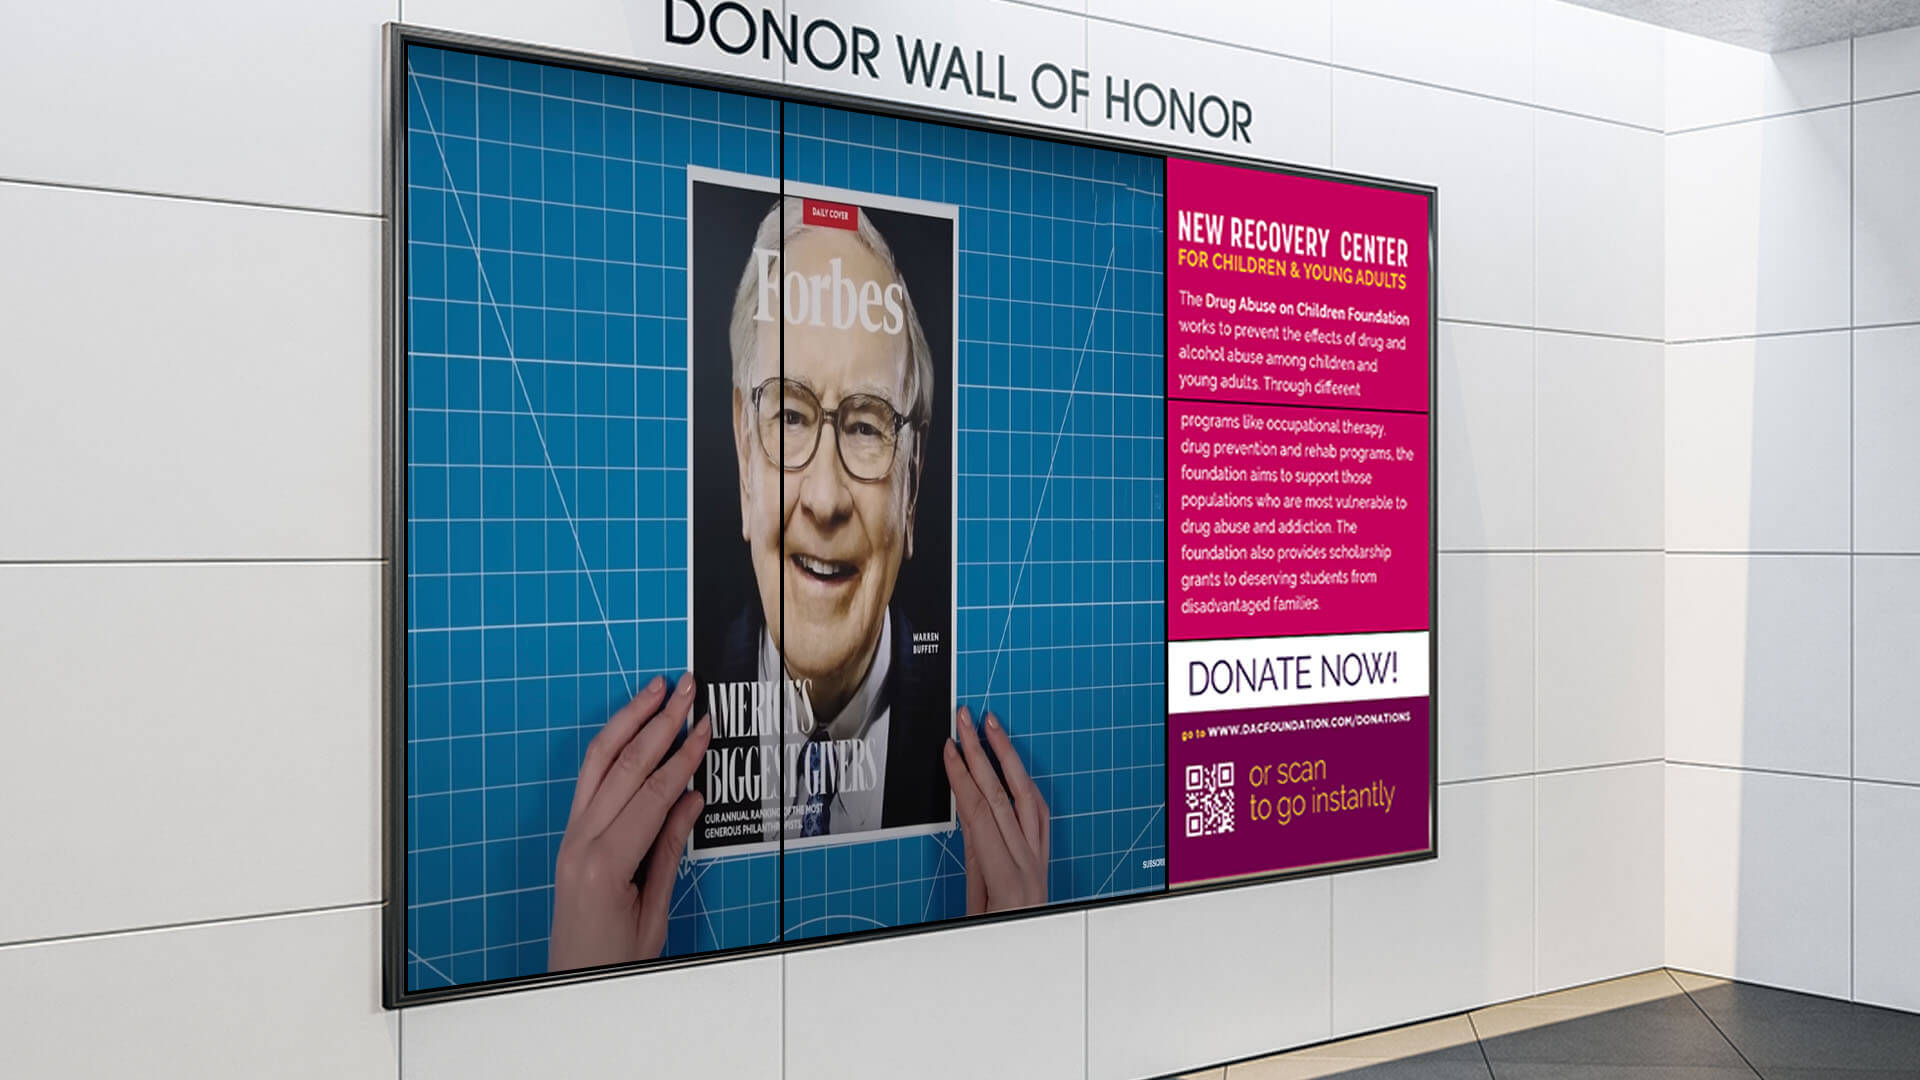 Digital donor recognition video wall showcasing news